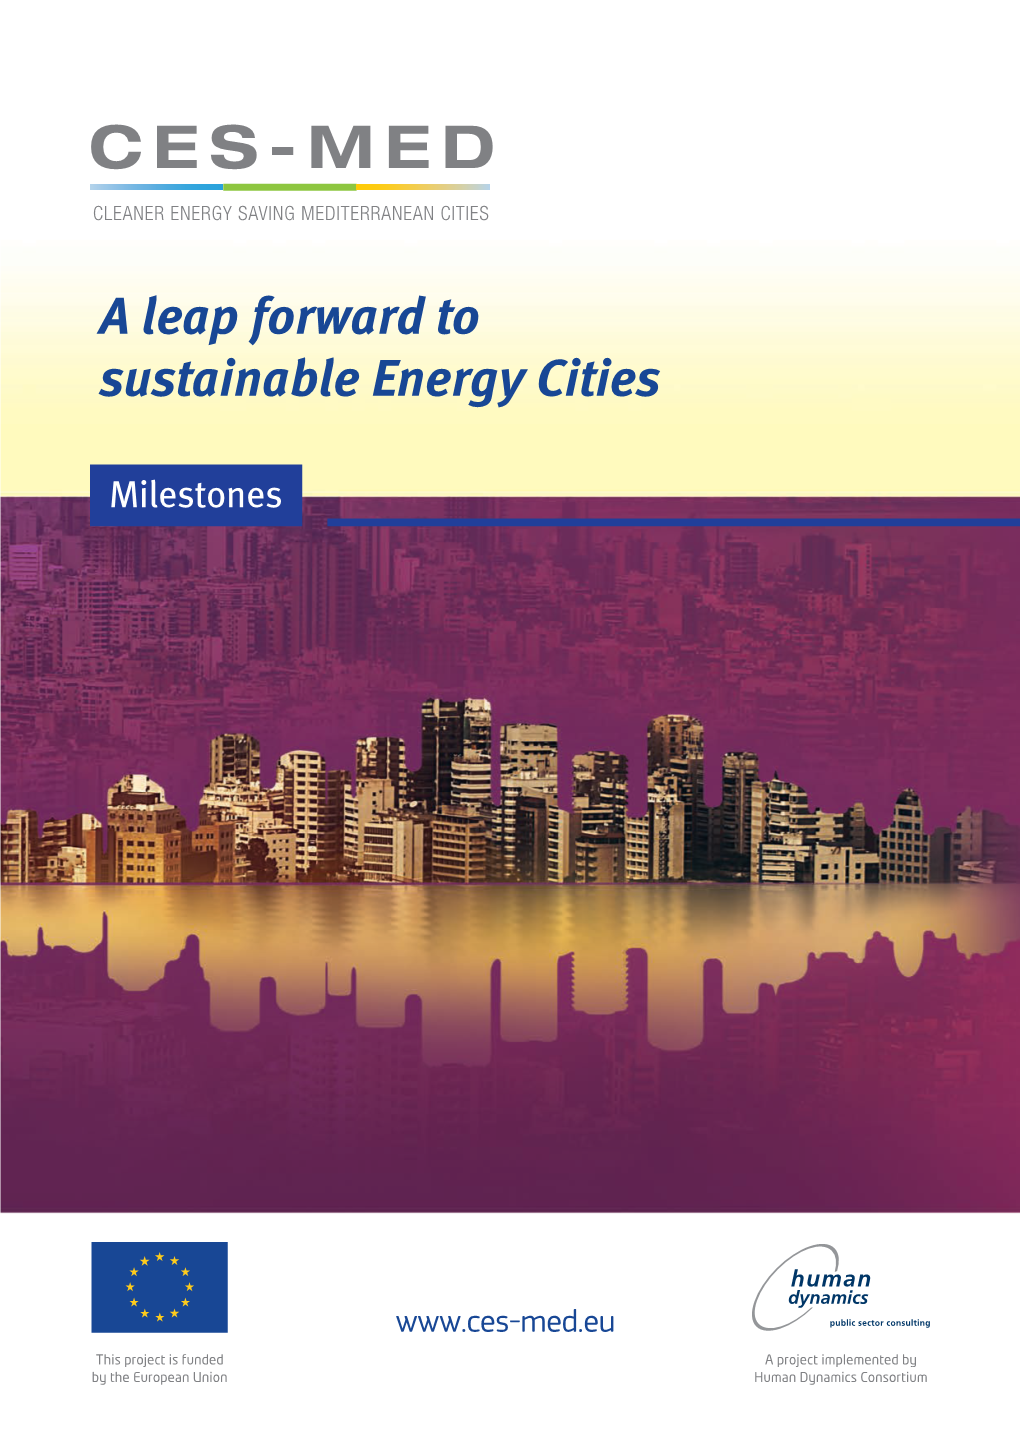 CES-MED: a Leap Forward to Sustainable Energy Cities